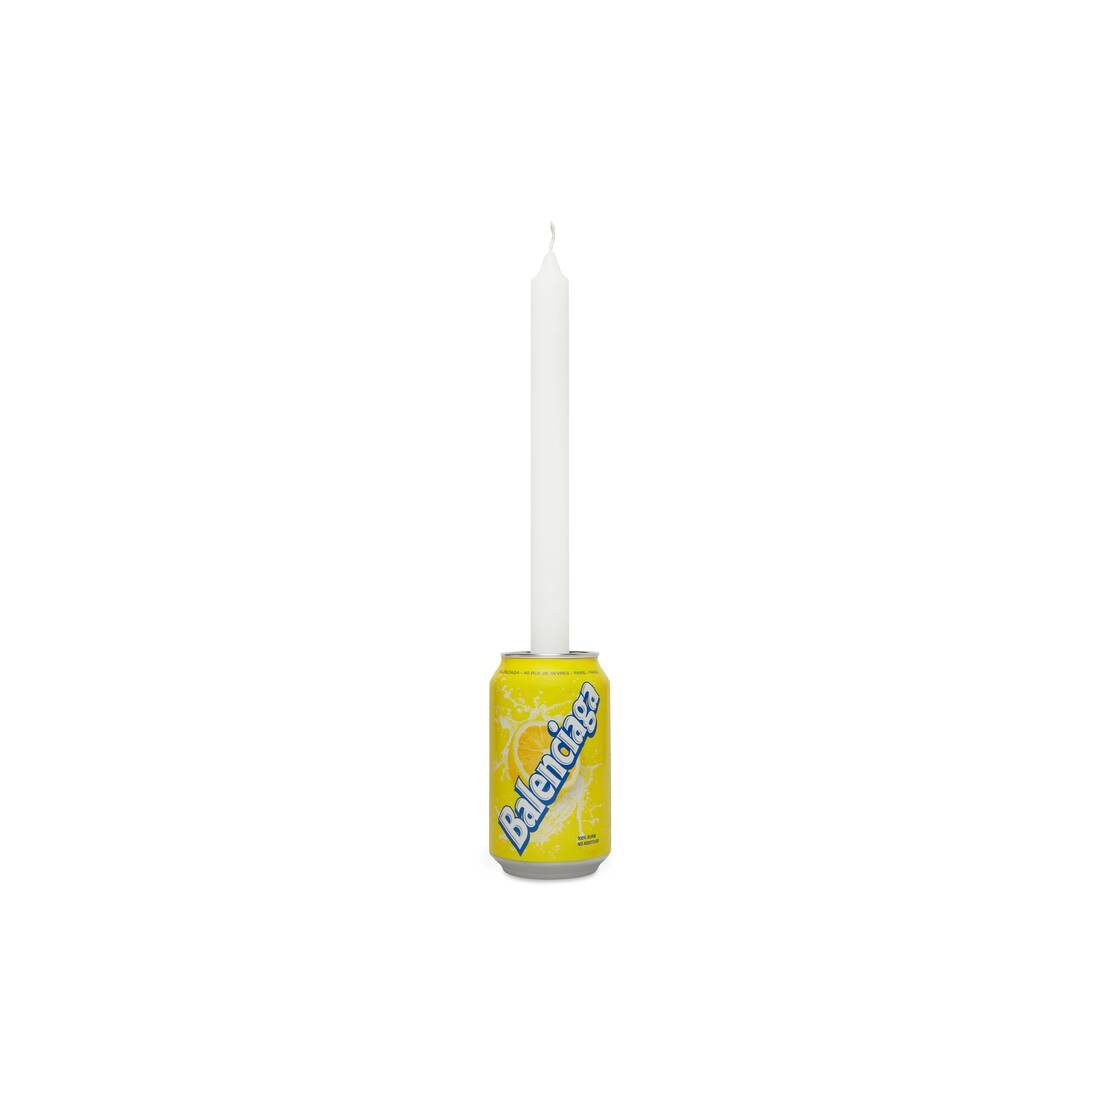 Candle Holder in Yellow - 1